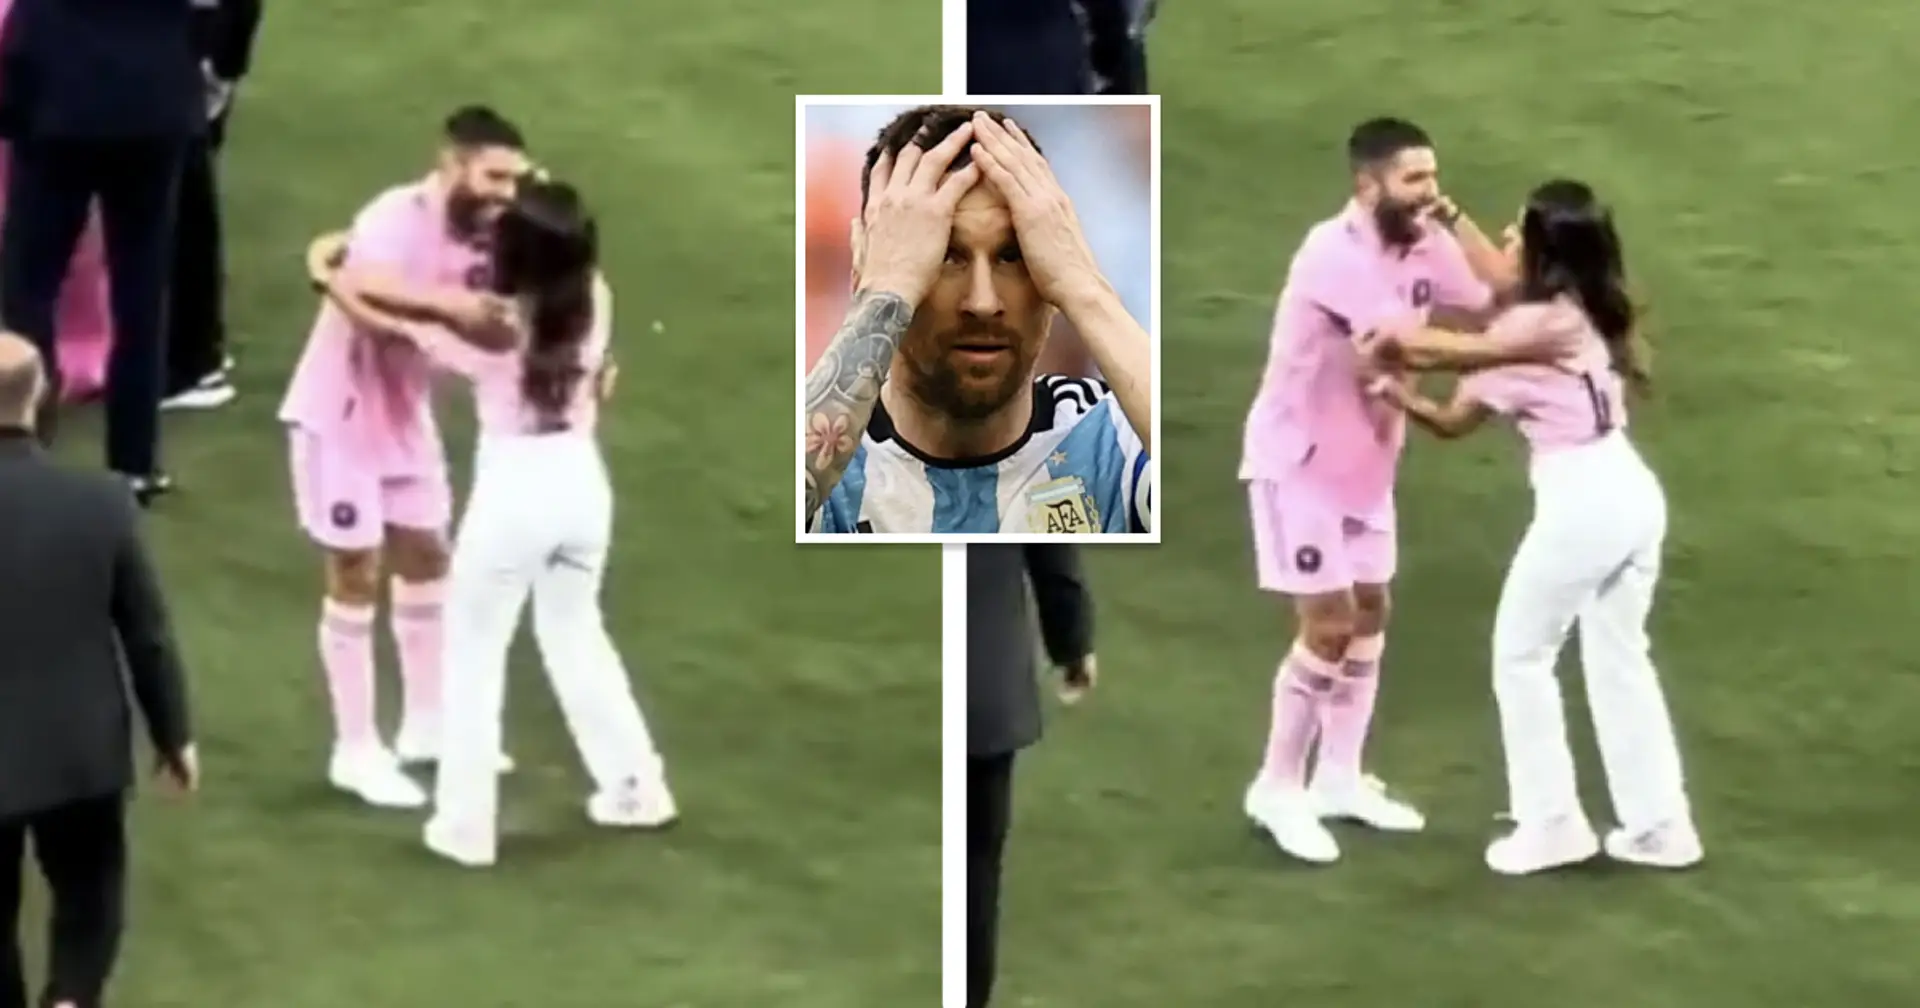 'Man was ready to risk it all': Fans react as Jordi Alba almost kisses Antonella on lips